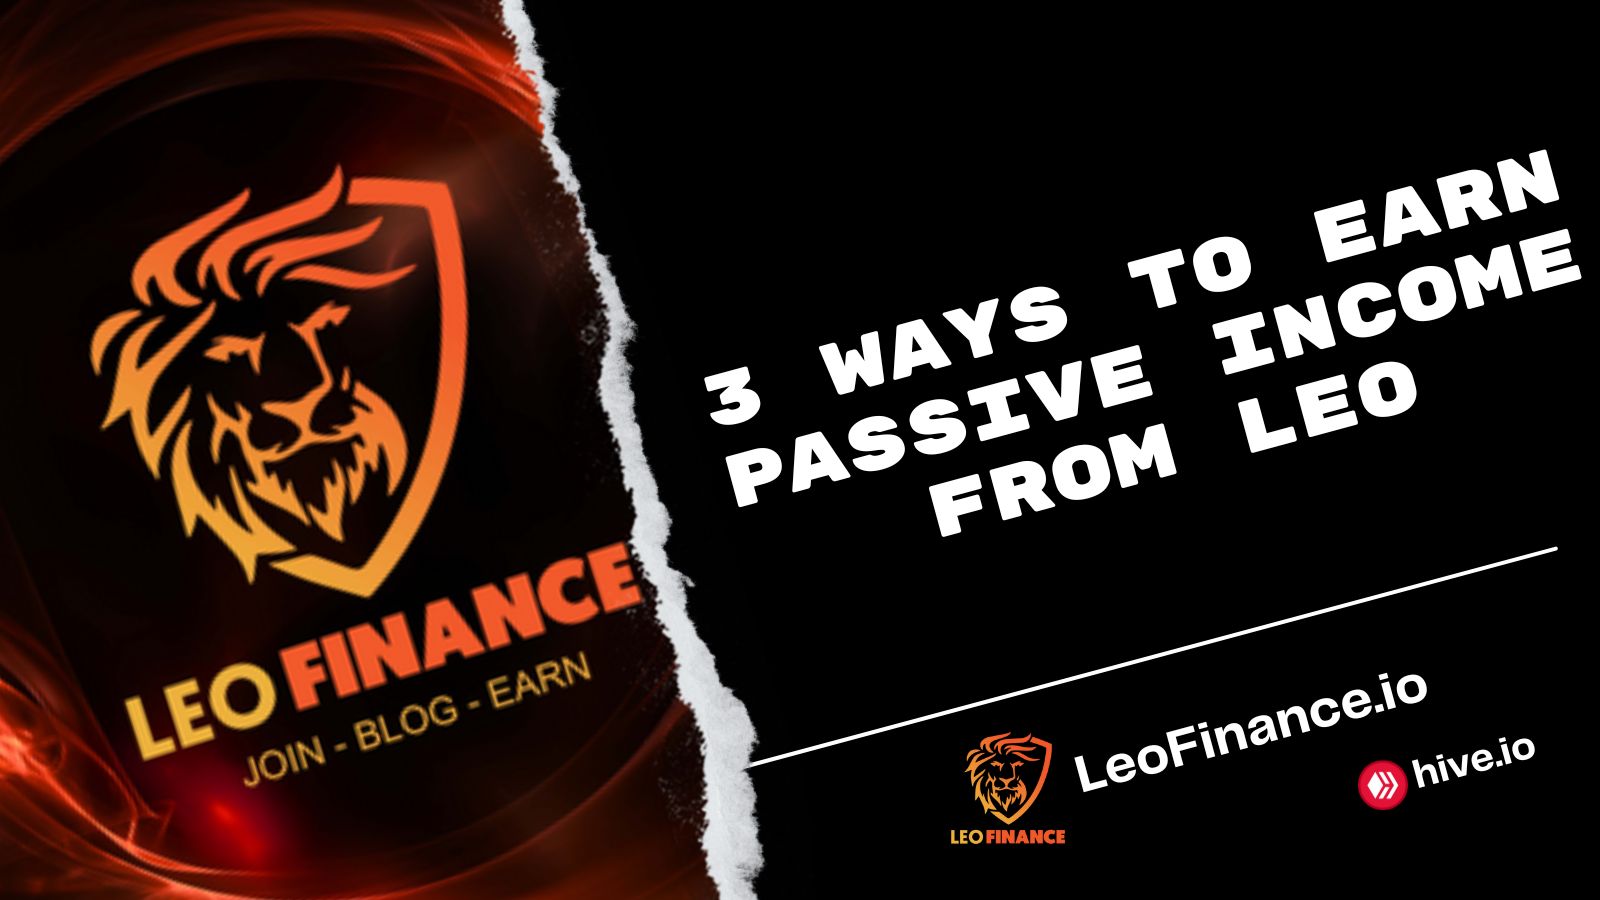 @bitcoinflood/3-ways-to-earn-passive-income-from-leo